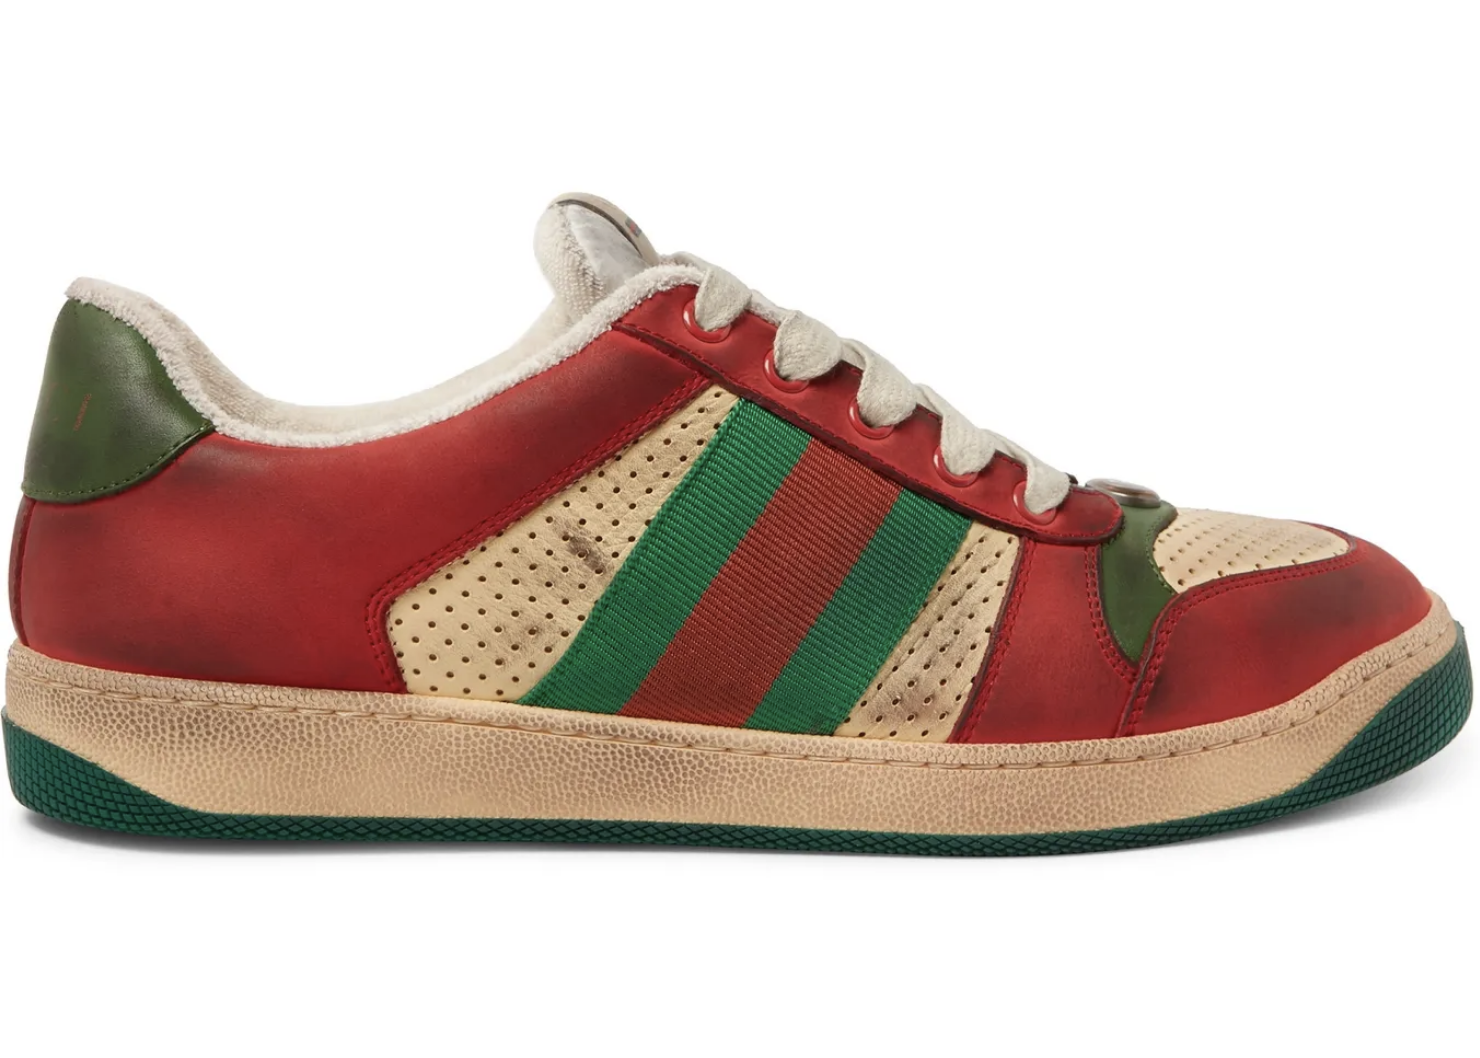 distressed sneakers gucci